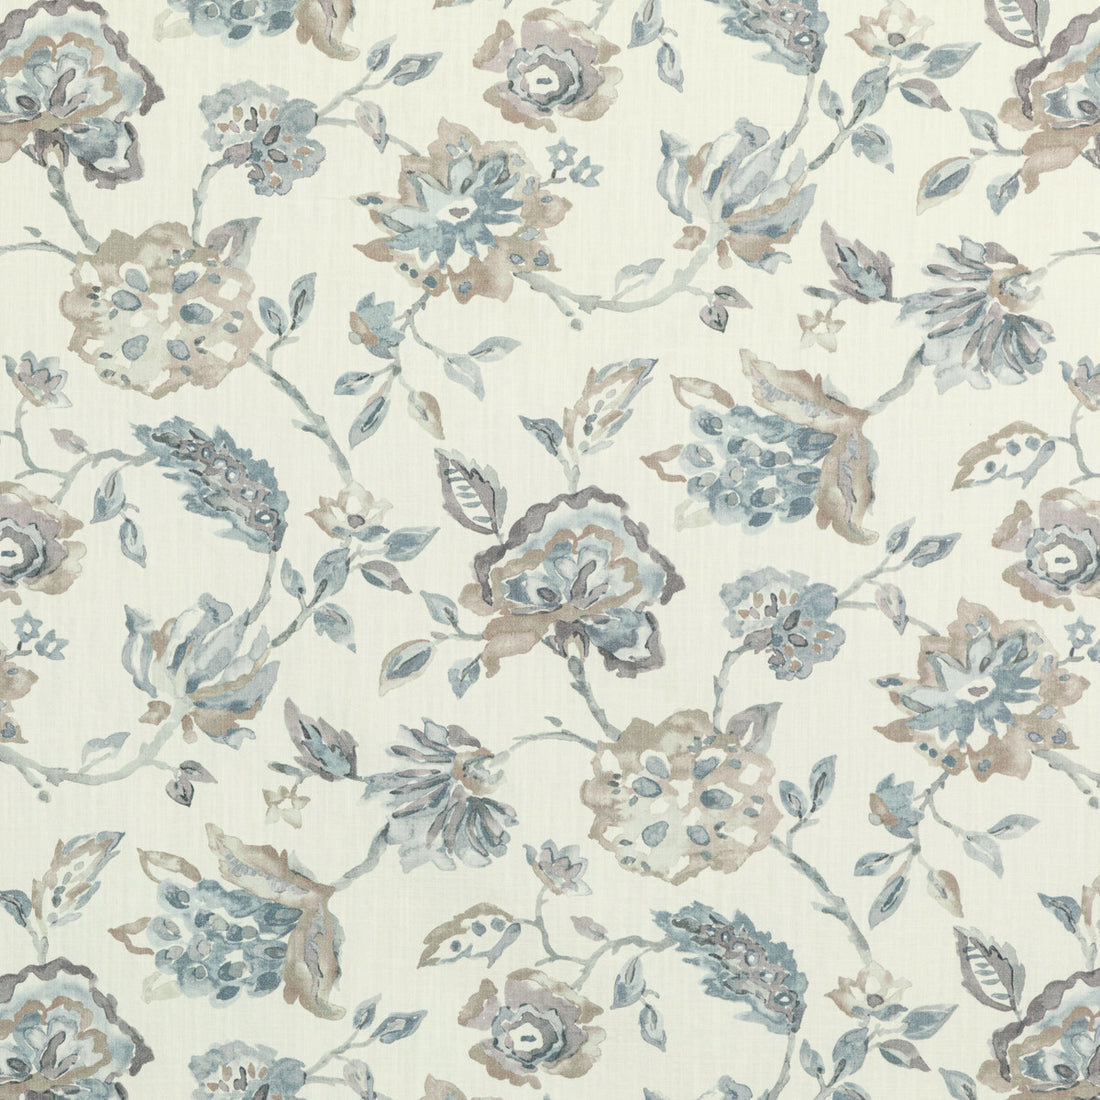 Etheria fabric in shadow color - pattern ETHERIA.110.0 - by Kravet Basics in the Monterey collection